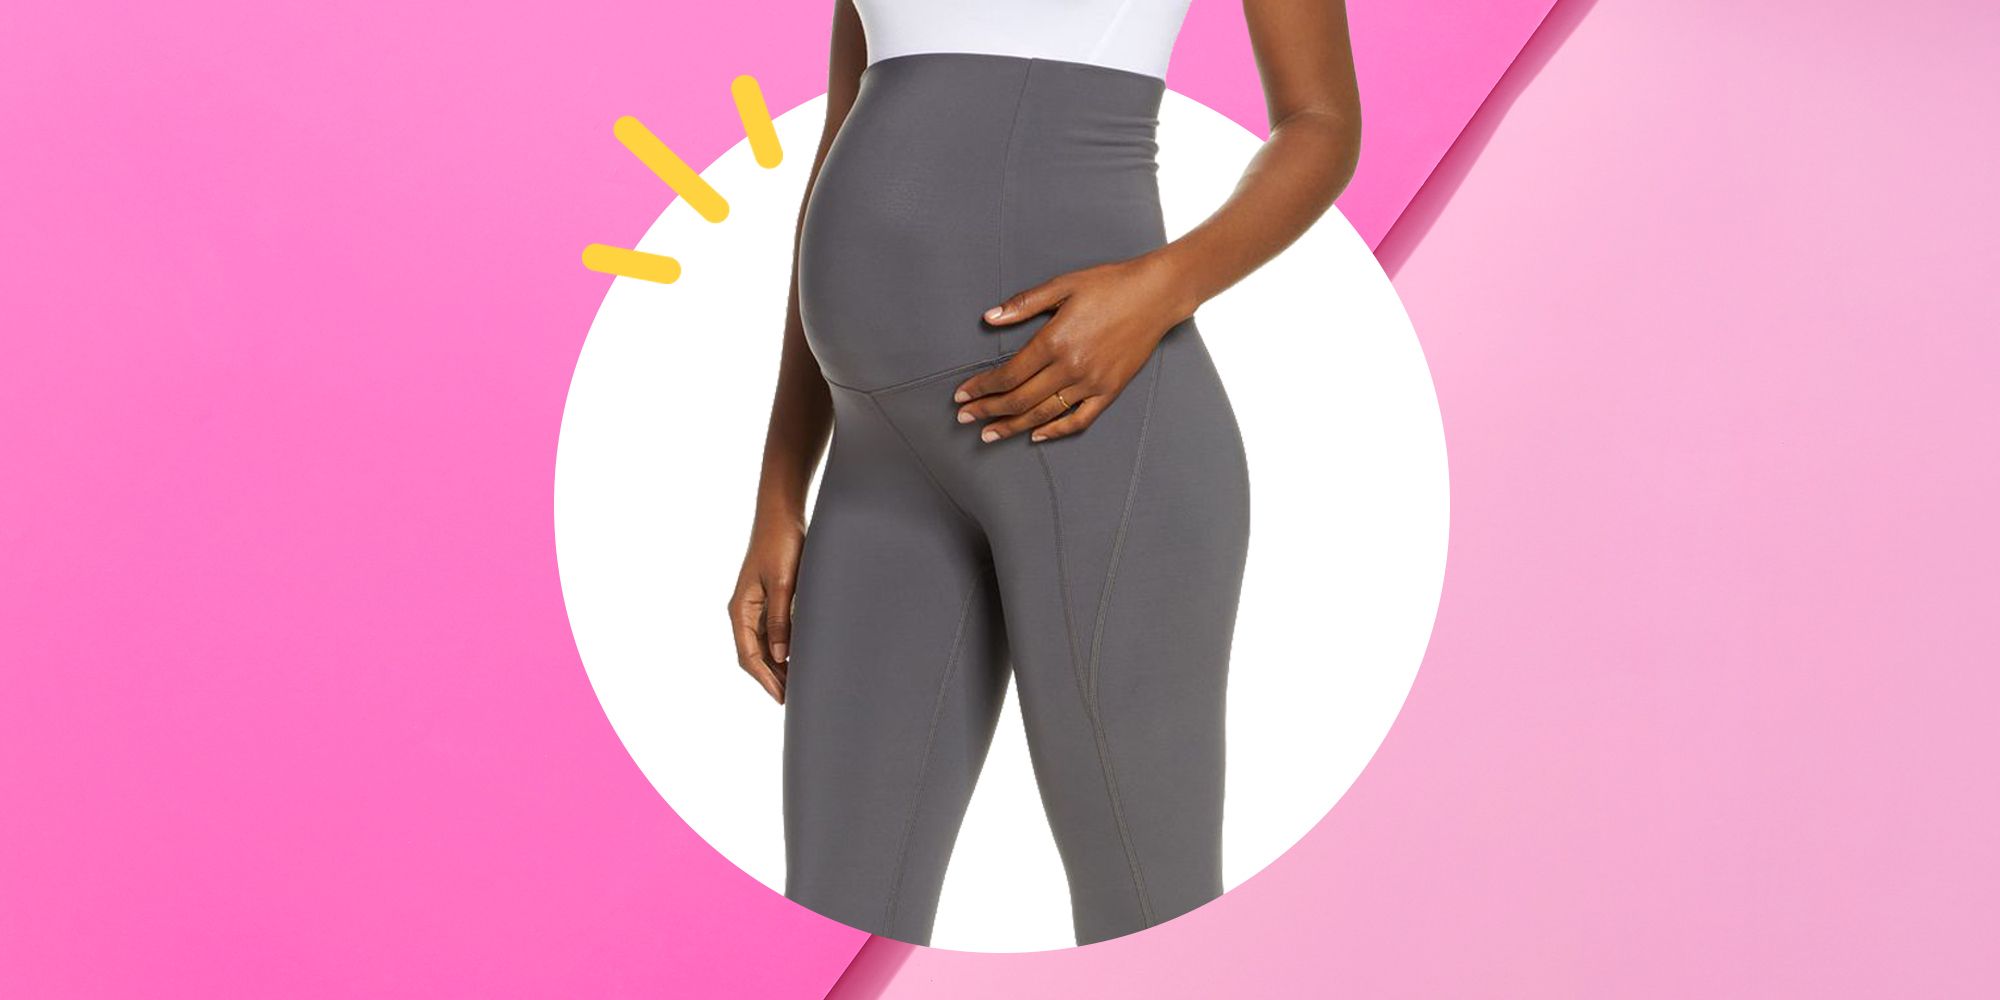 Maternity Sports Pants Drawstring Workout Casual Track Pants with Pockets Black M